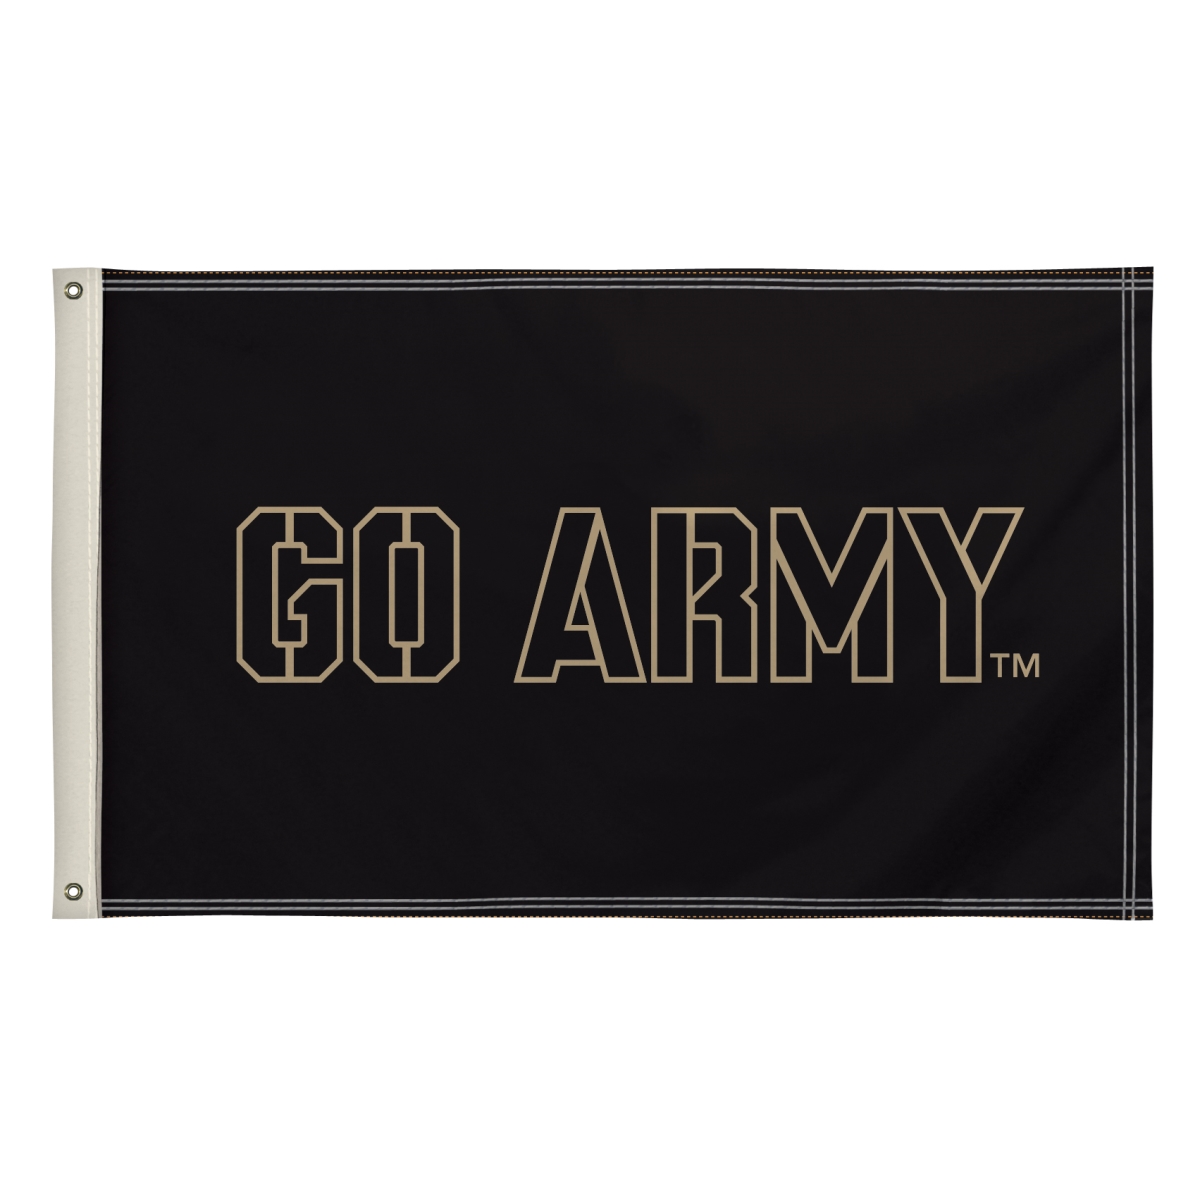 Picture of Showdown Displays 810003ARMY-003 3 x 5 ft. Army Black Knights NCAA Flag - No.003